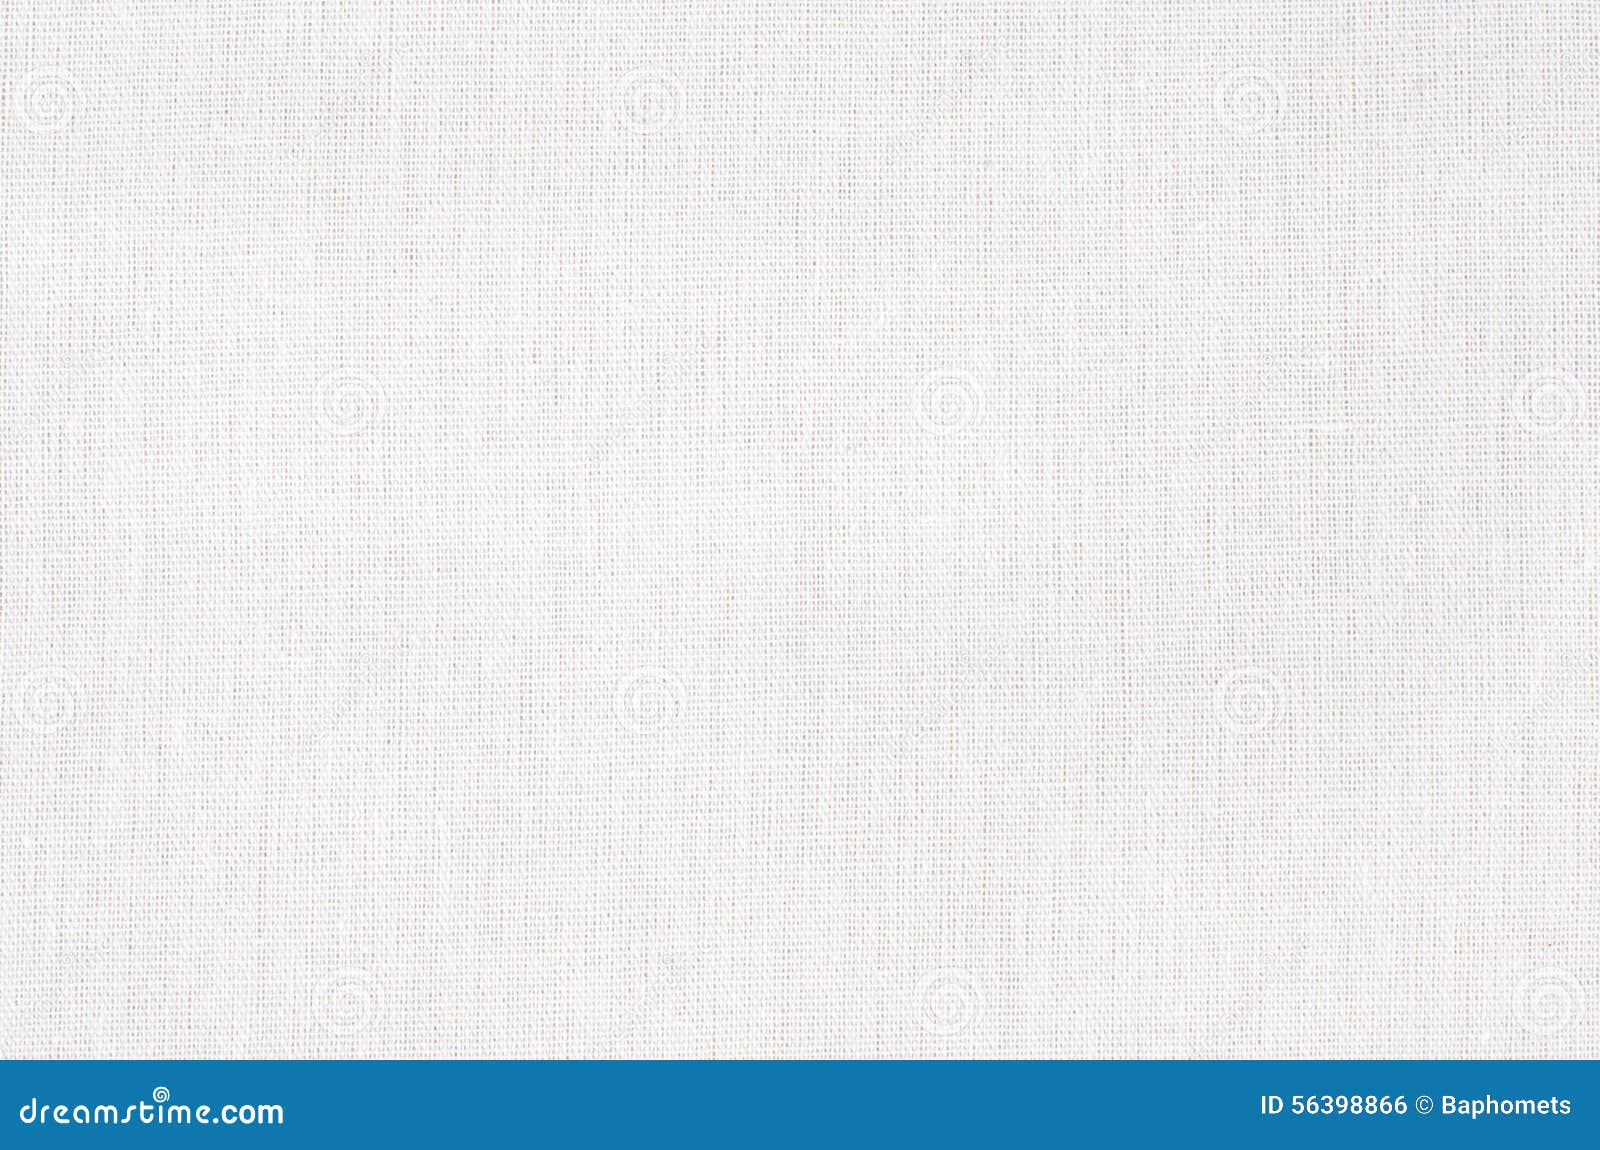 white fabric texture or background, white canvas